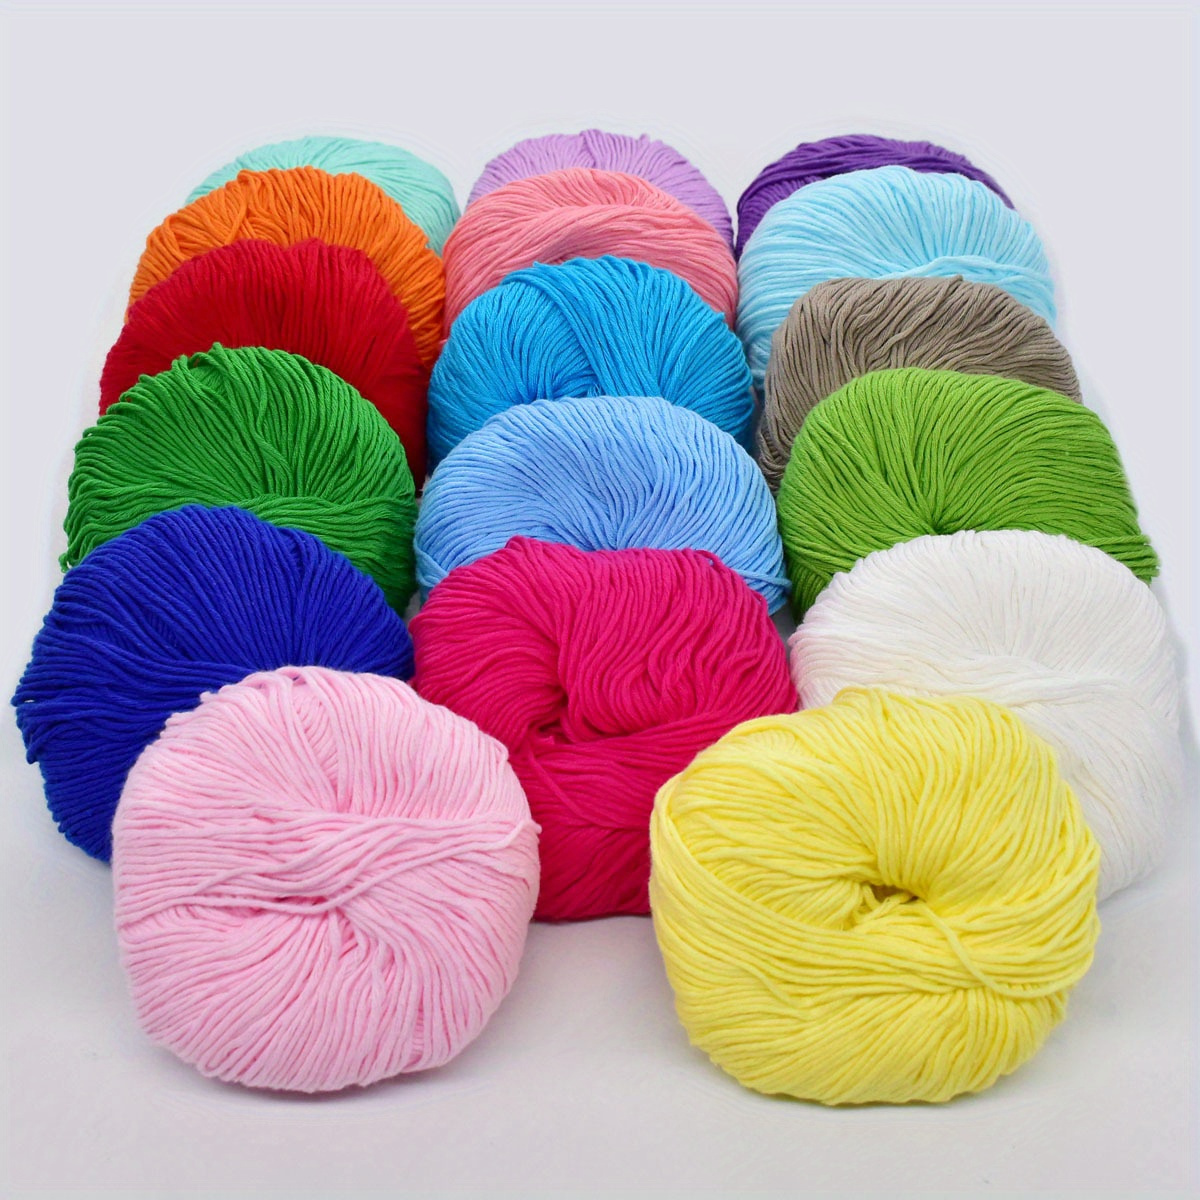 Cotton 4ply Yarns  50g 100% Pure Cotton to Knit or Crochet